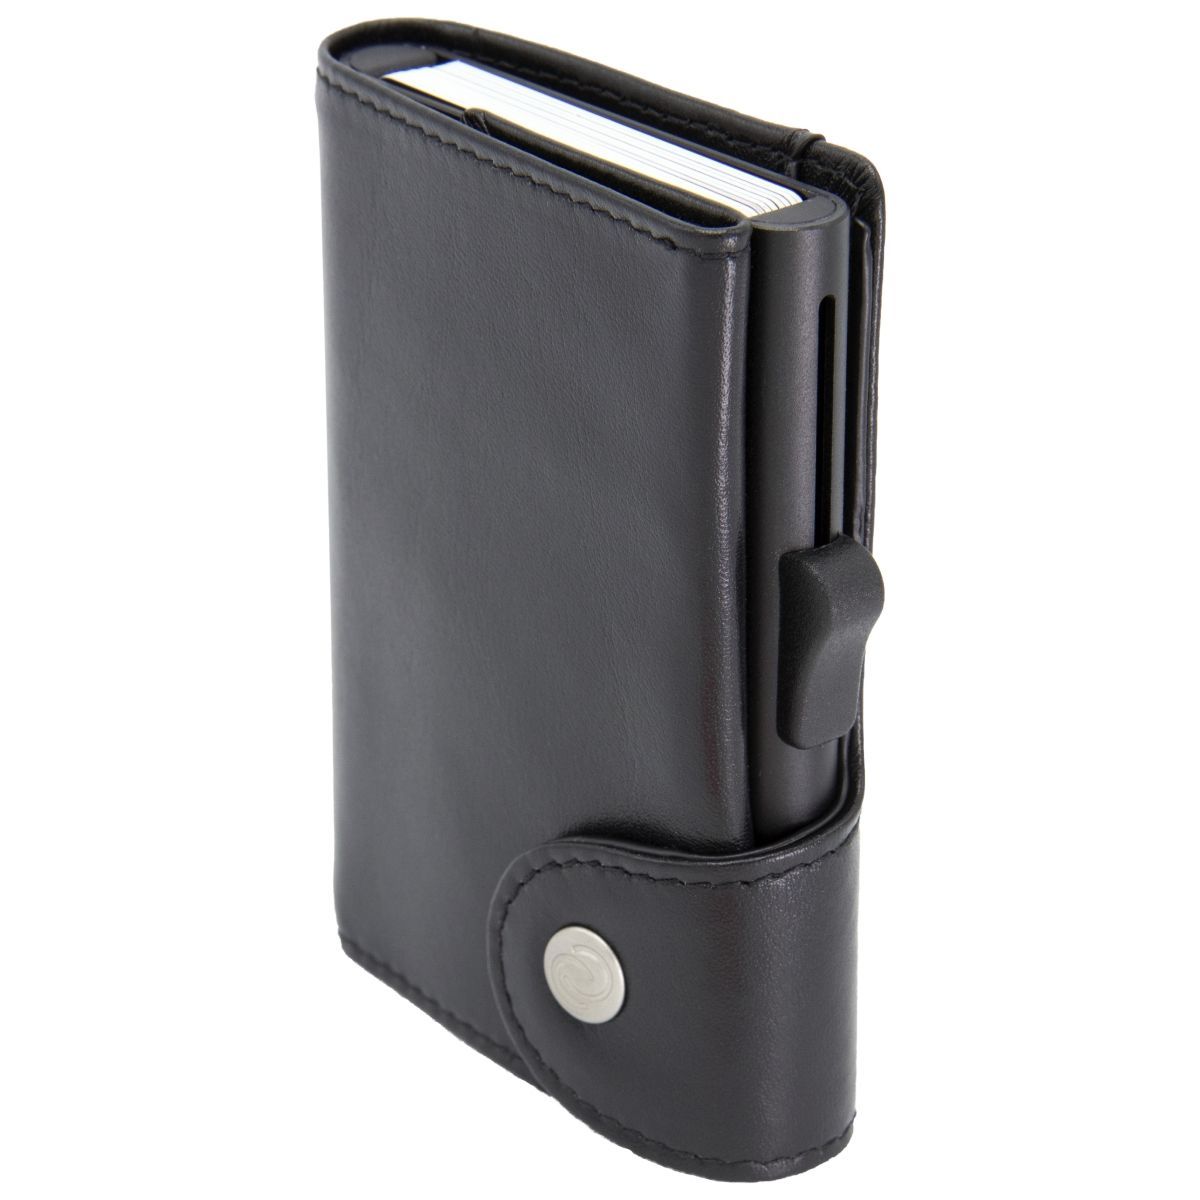 C-Secure XL Aluminum Wallet with Genuine Leather and Coins Pocket - Black